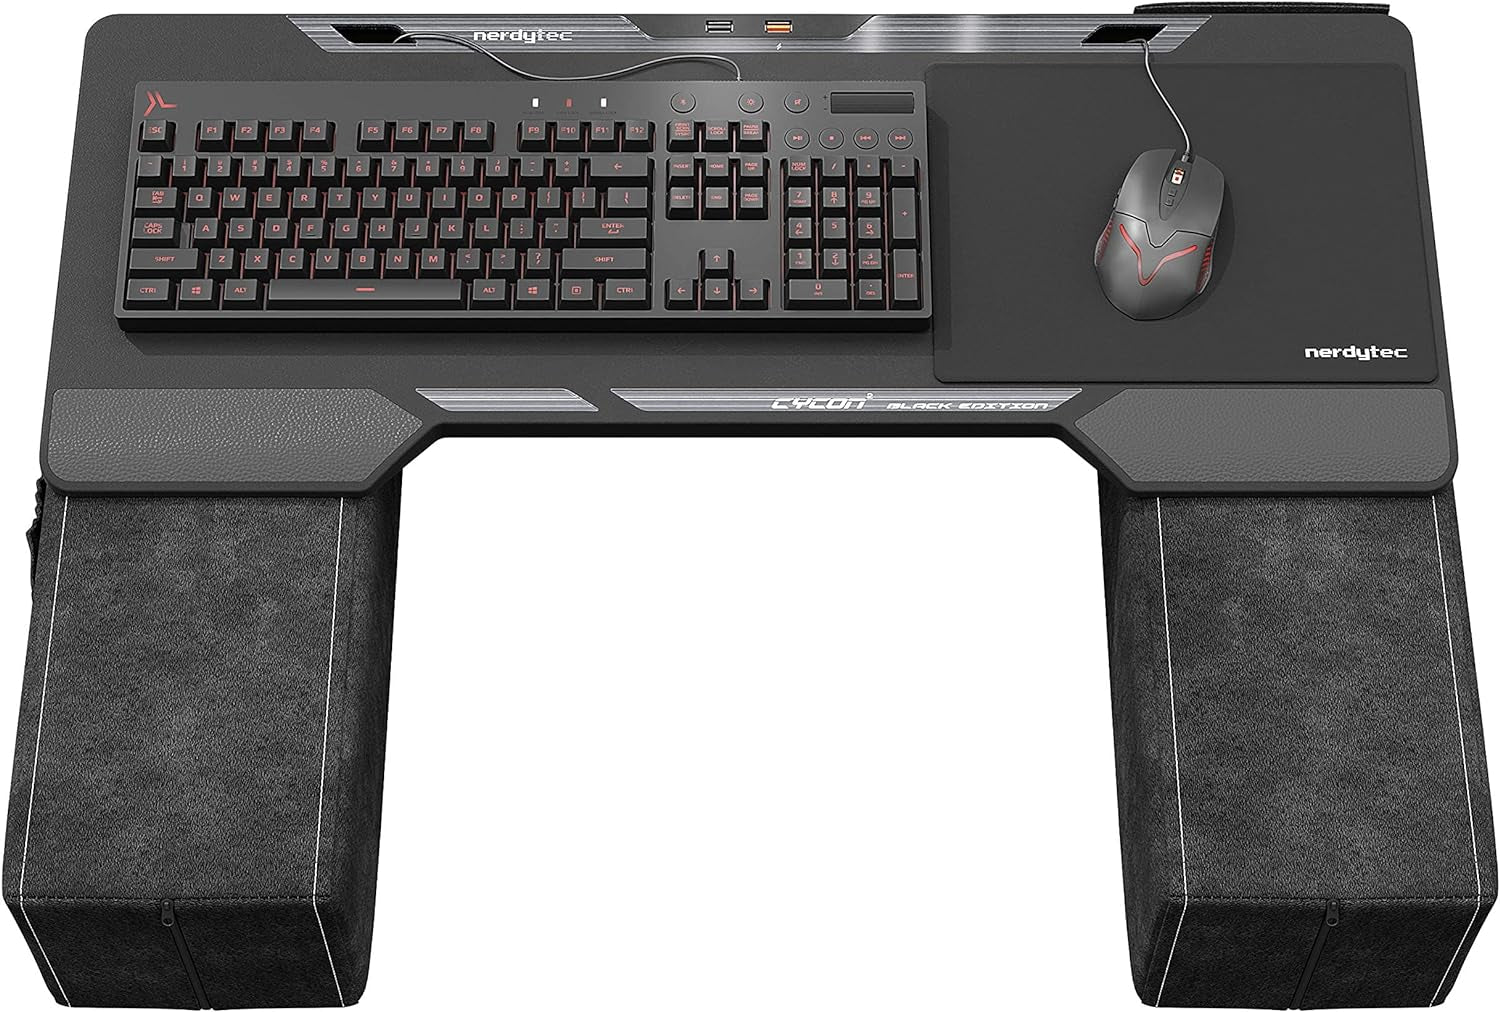 CYCON² Black Edition - Couch Gaming Desk for Mouse & Keyboard (For PC, PS4/5, Xbox One/Series X), Ergonomic Lapdesk for Couch & Bed